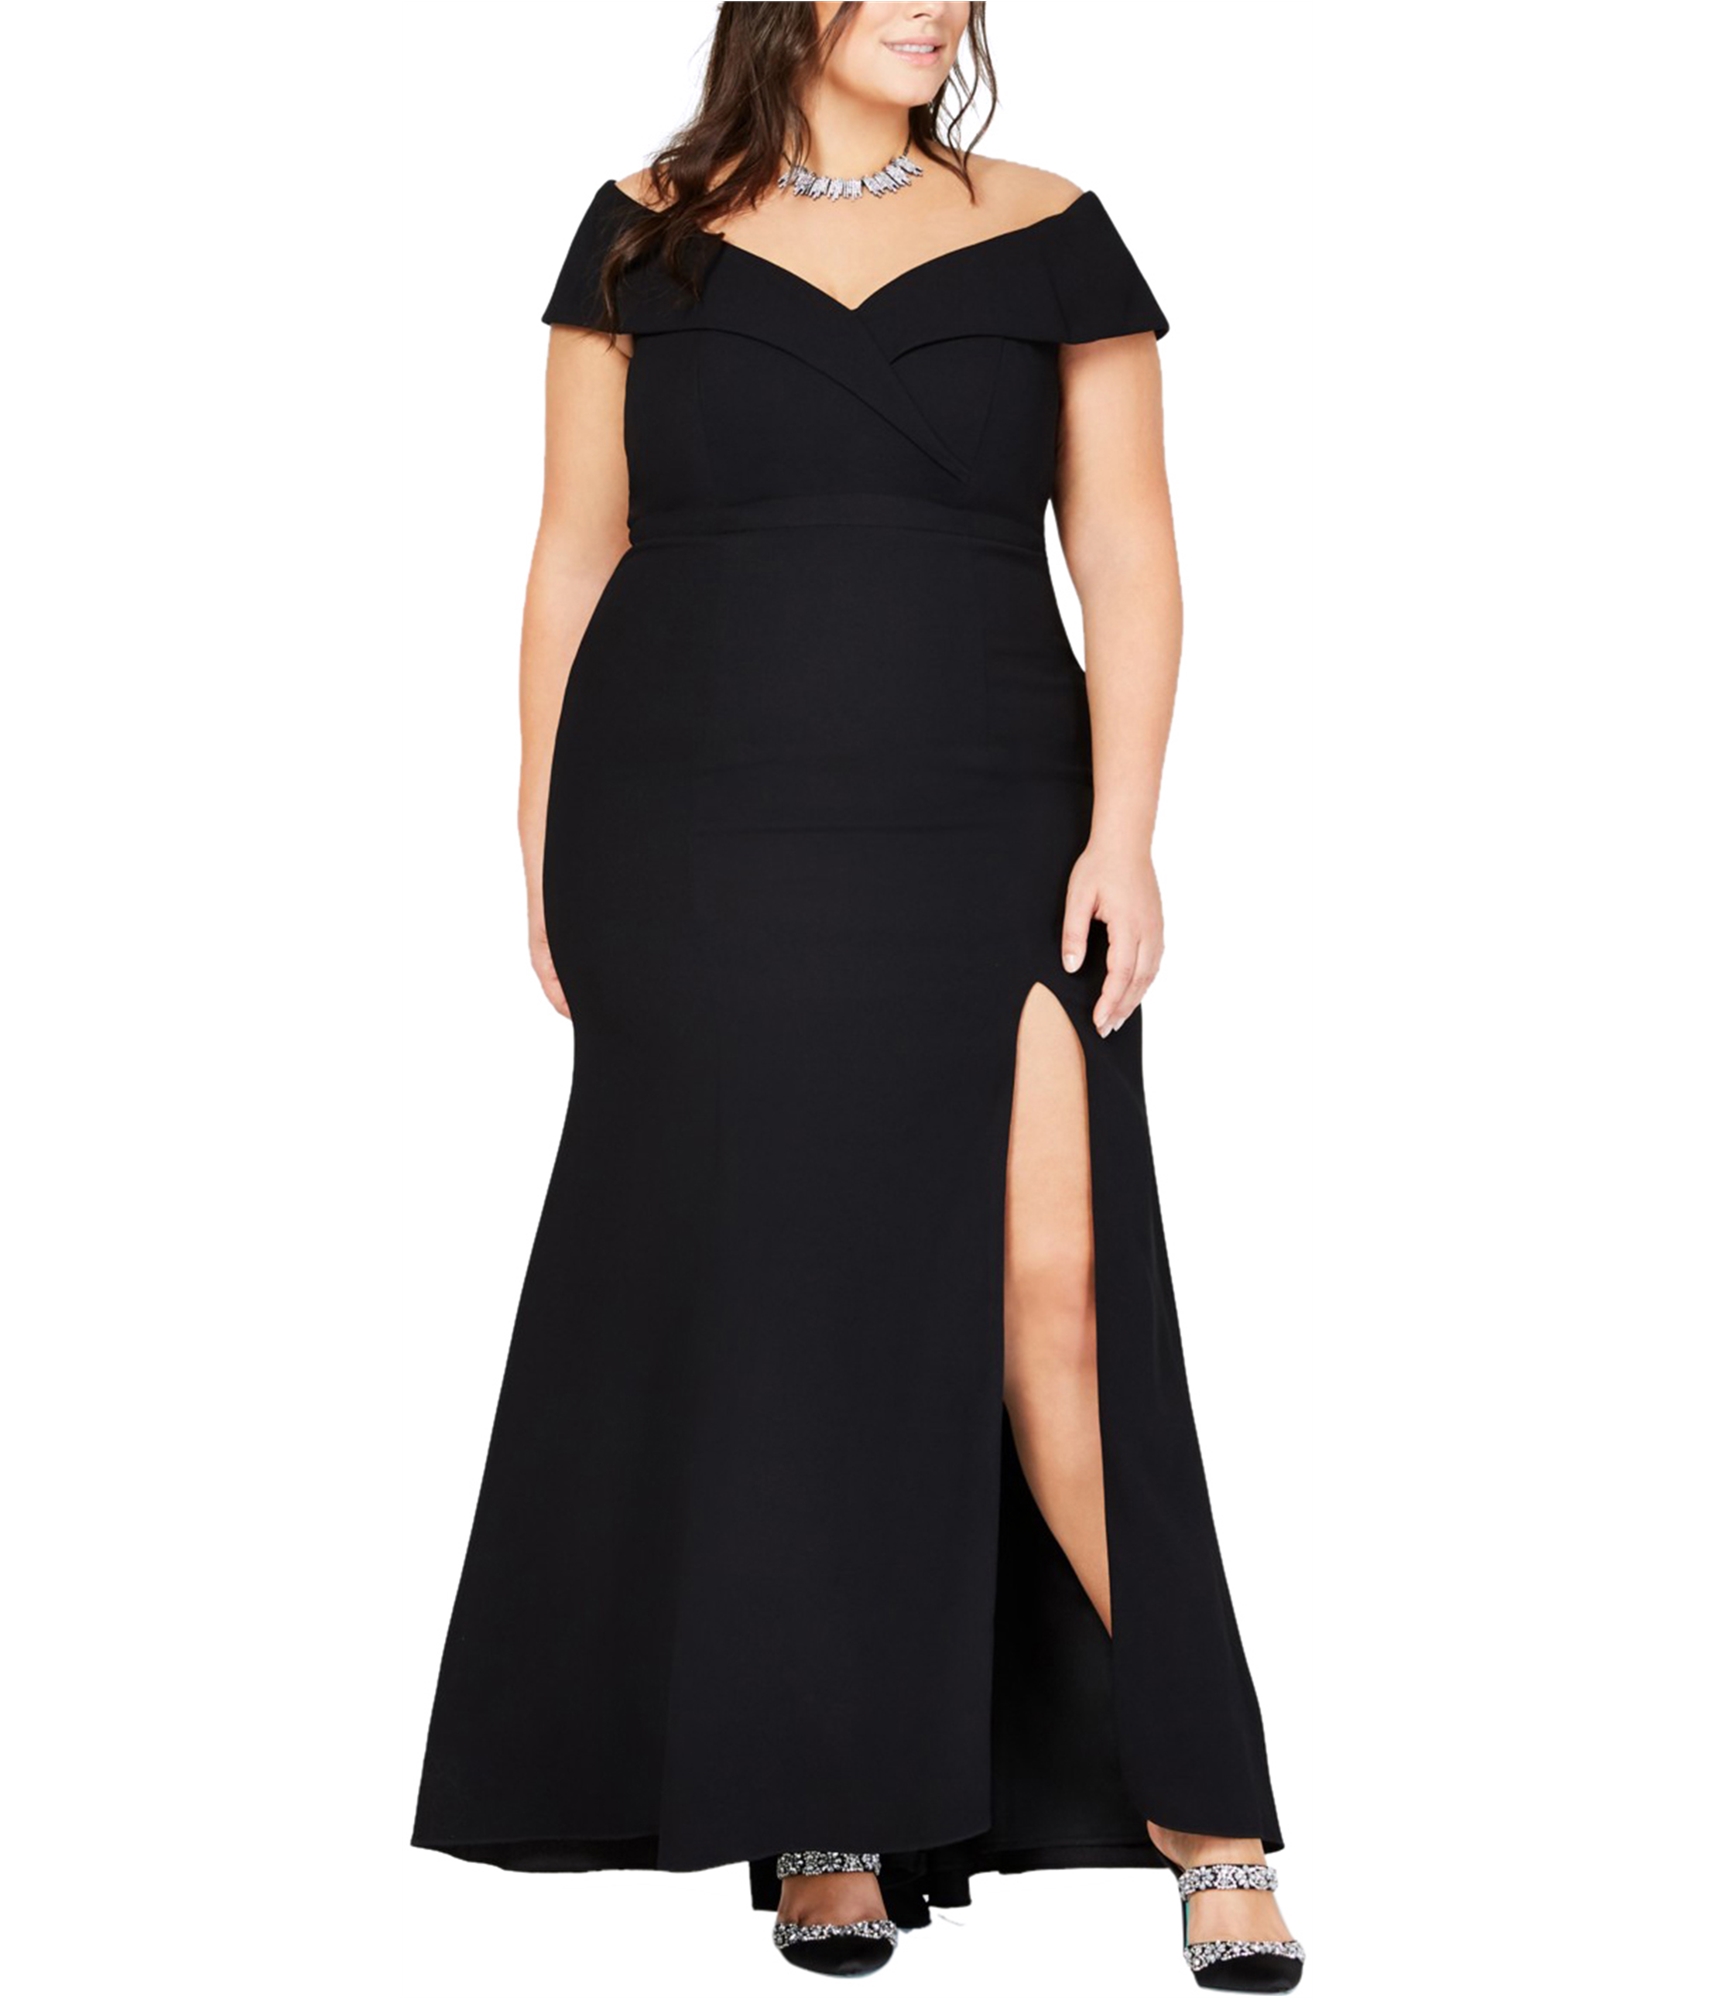 New and used Plus Size Dresses for sale